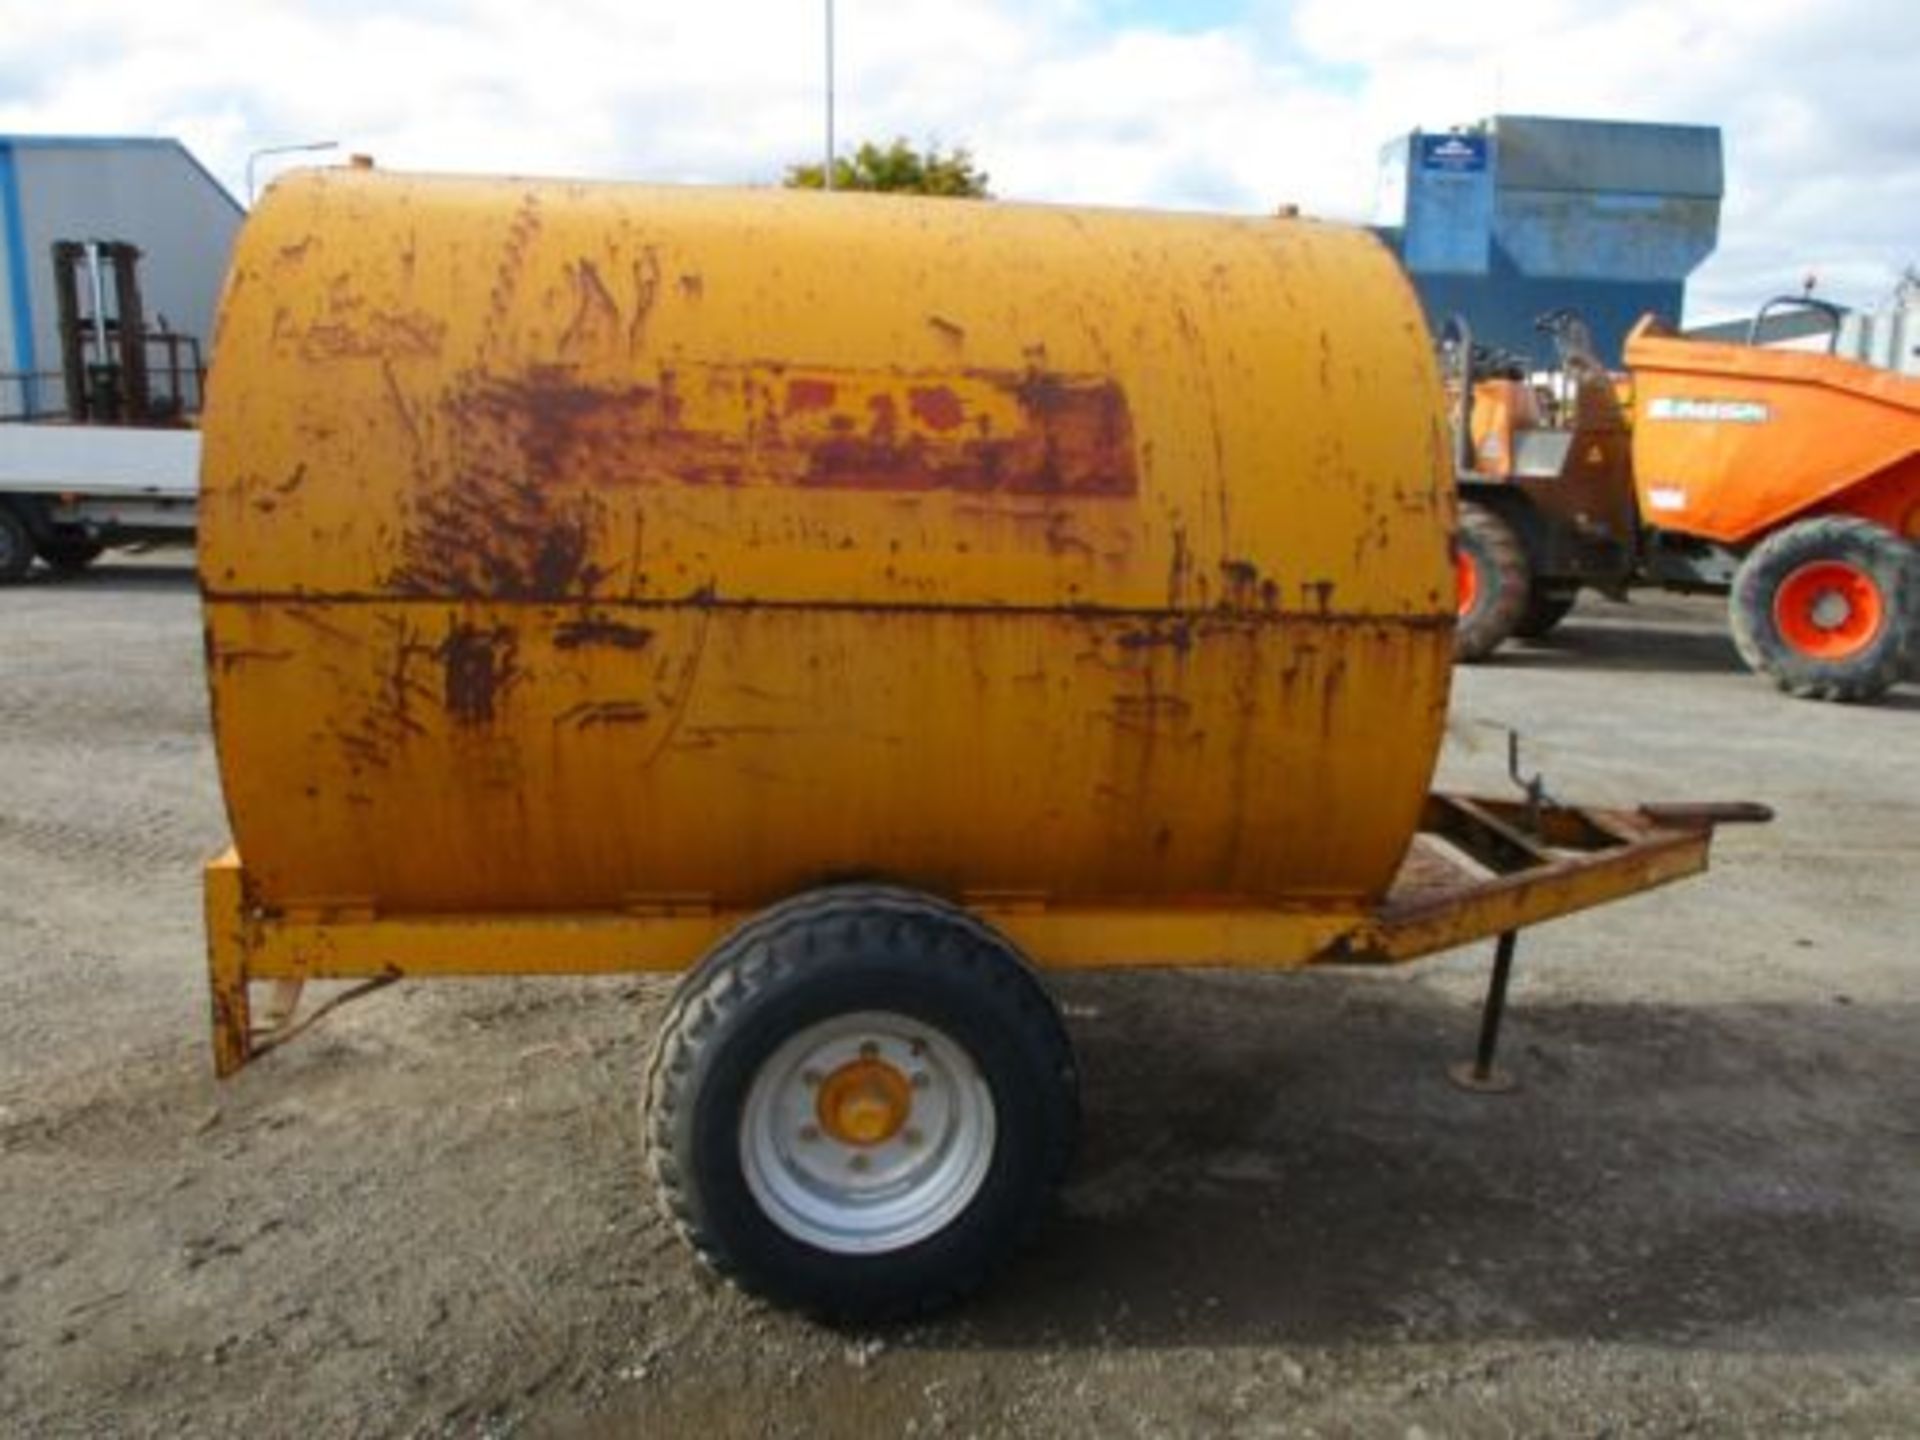 TRAILER ENGINEERING BUNDED FUEL BOWSER DIESEL TANK TOWABLE DELIVERY ARRANGED